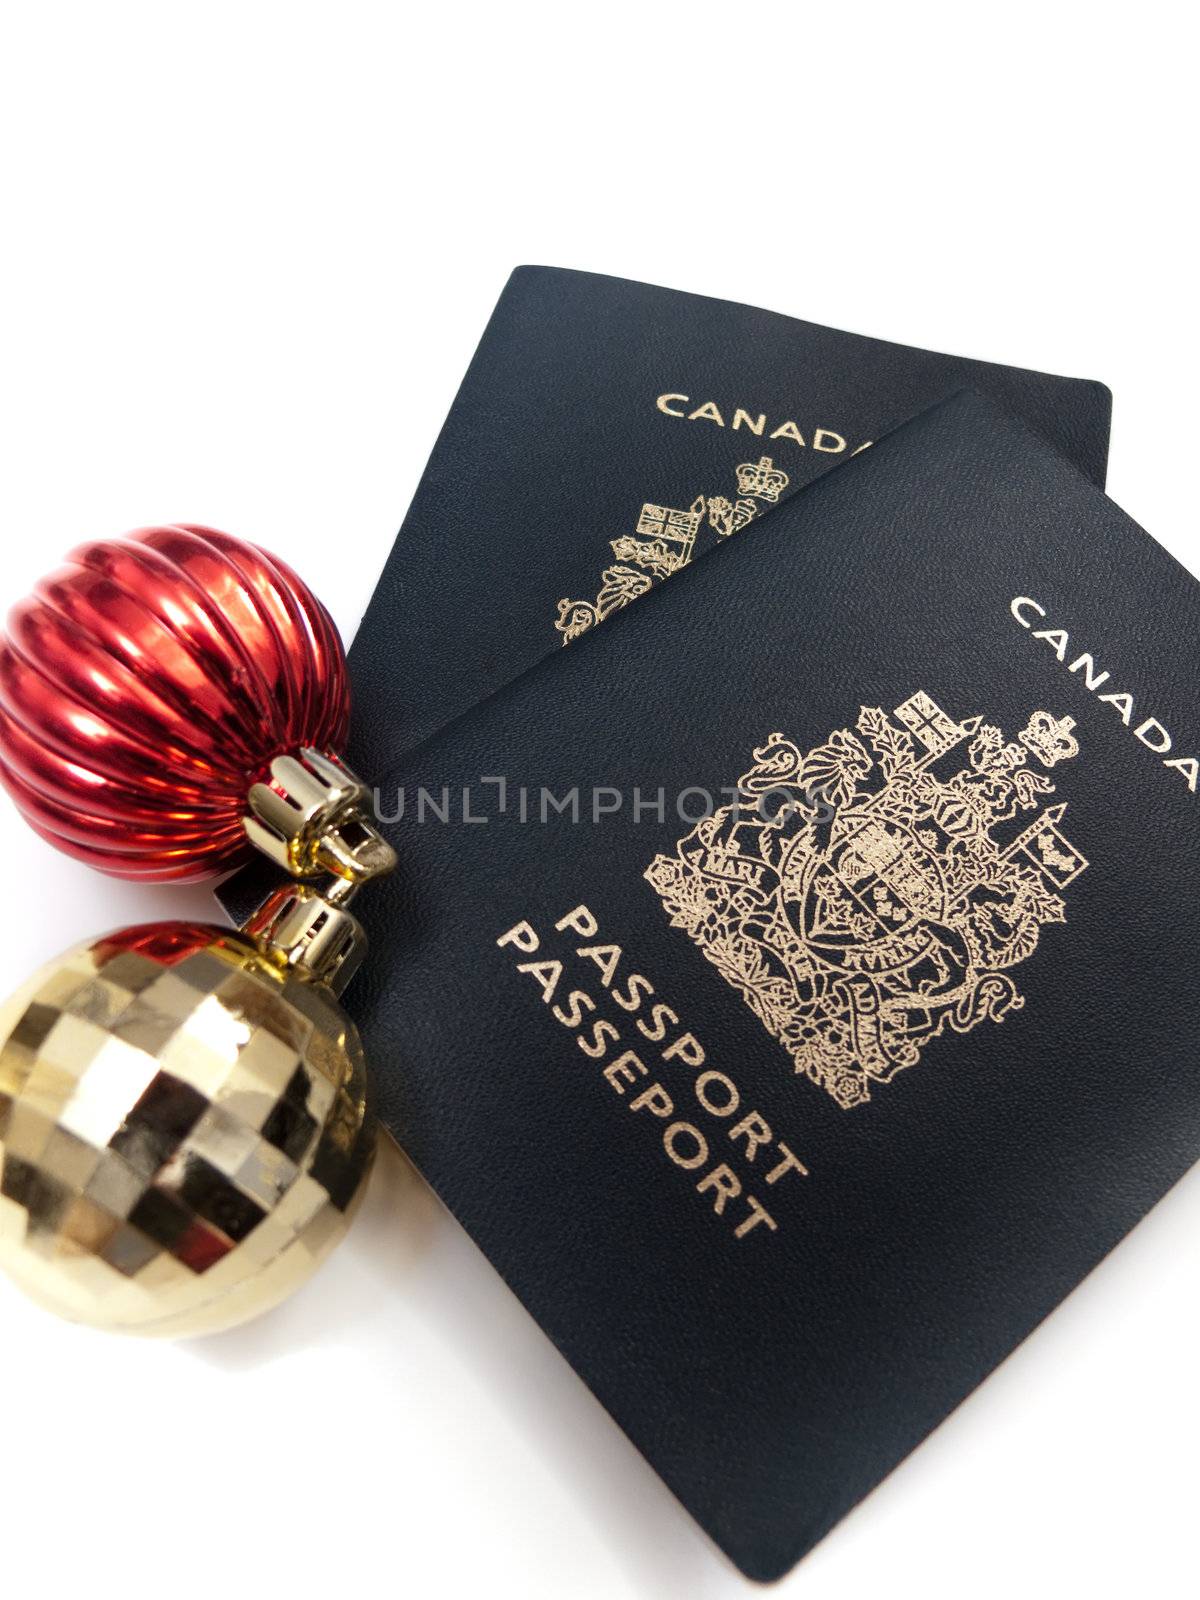 Two christmas baubles beside two Canadian passports, isolated on white.